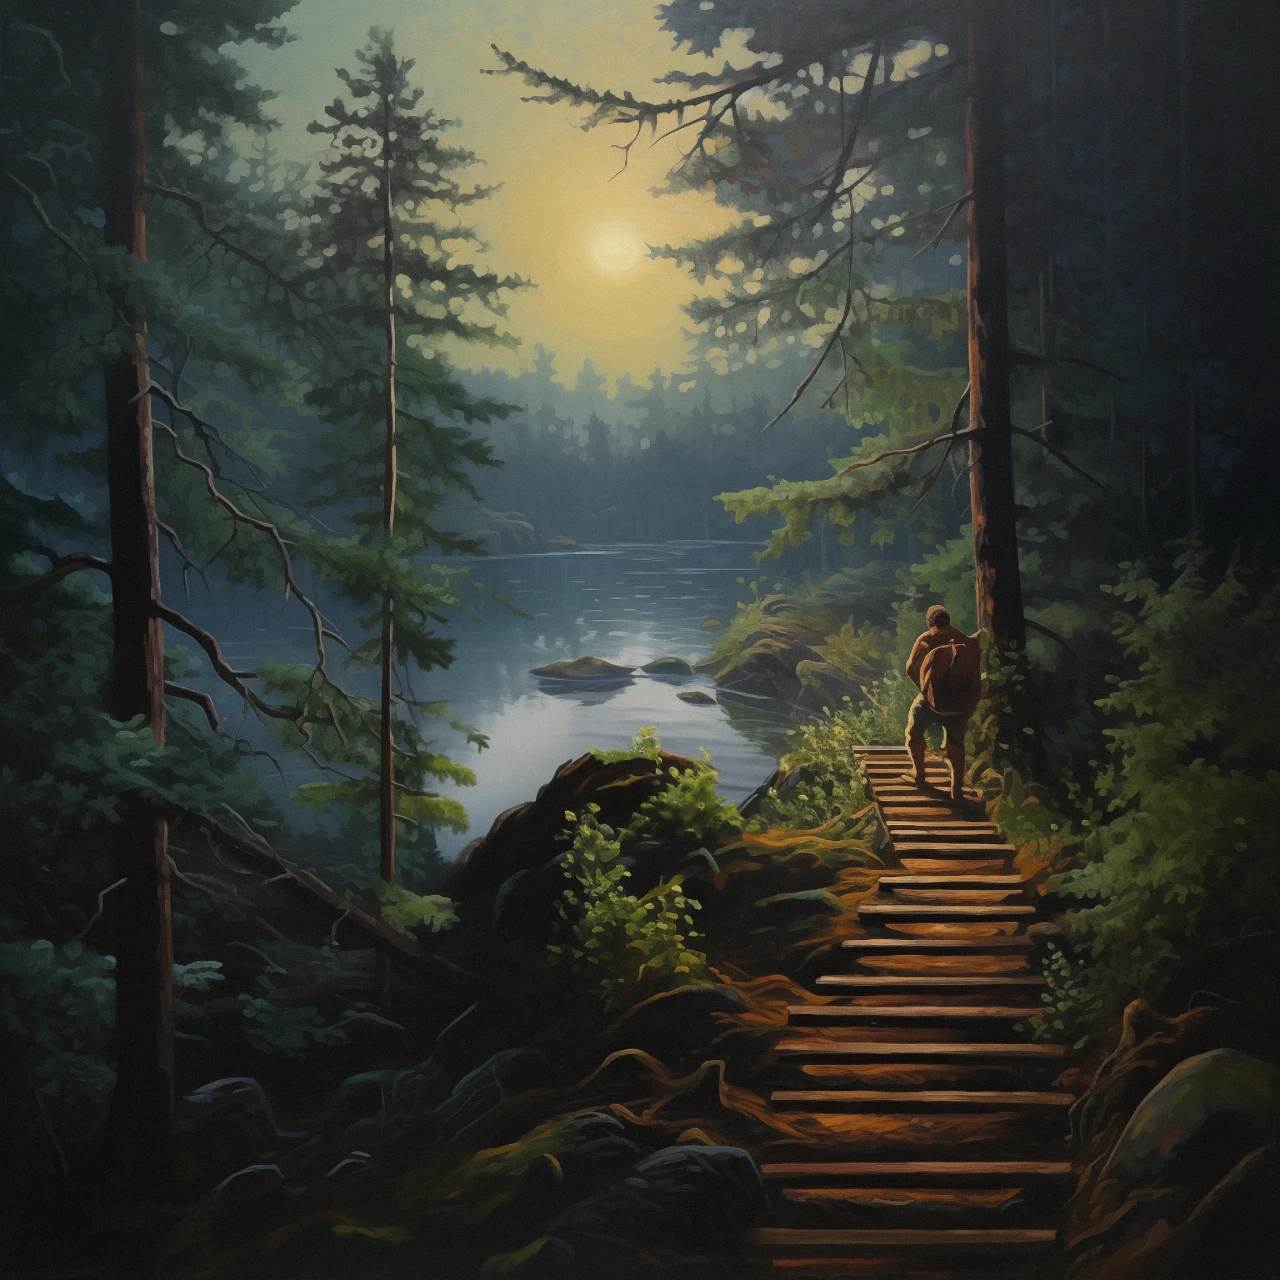 An impressionist style painting of a man descending wooden stairs toward a river in the early morning